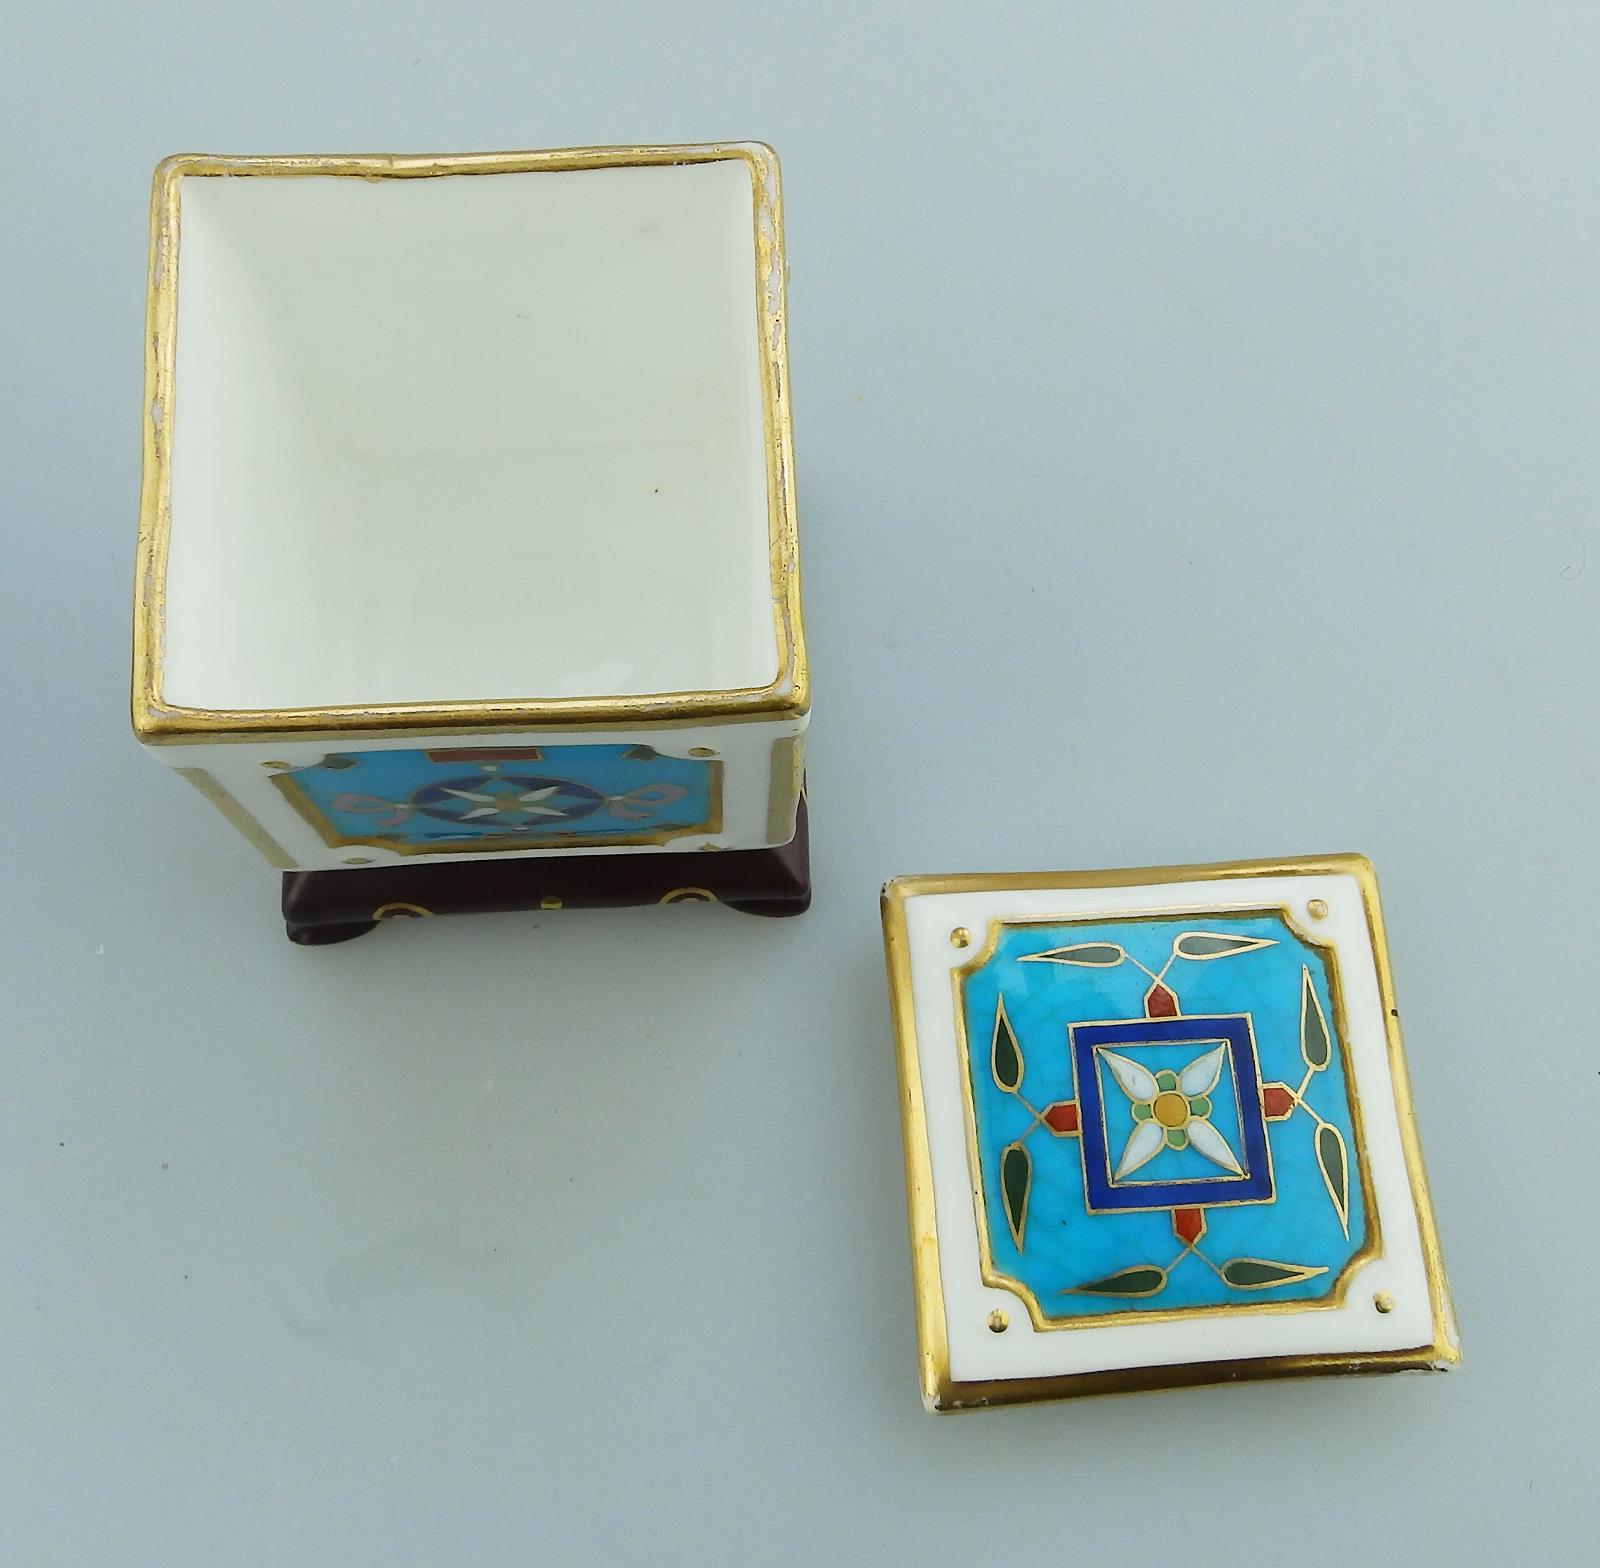 A pair of Minton porcelain miniature Boxes designed by Christopher Dresser 19thC - Image 5 of 9